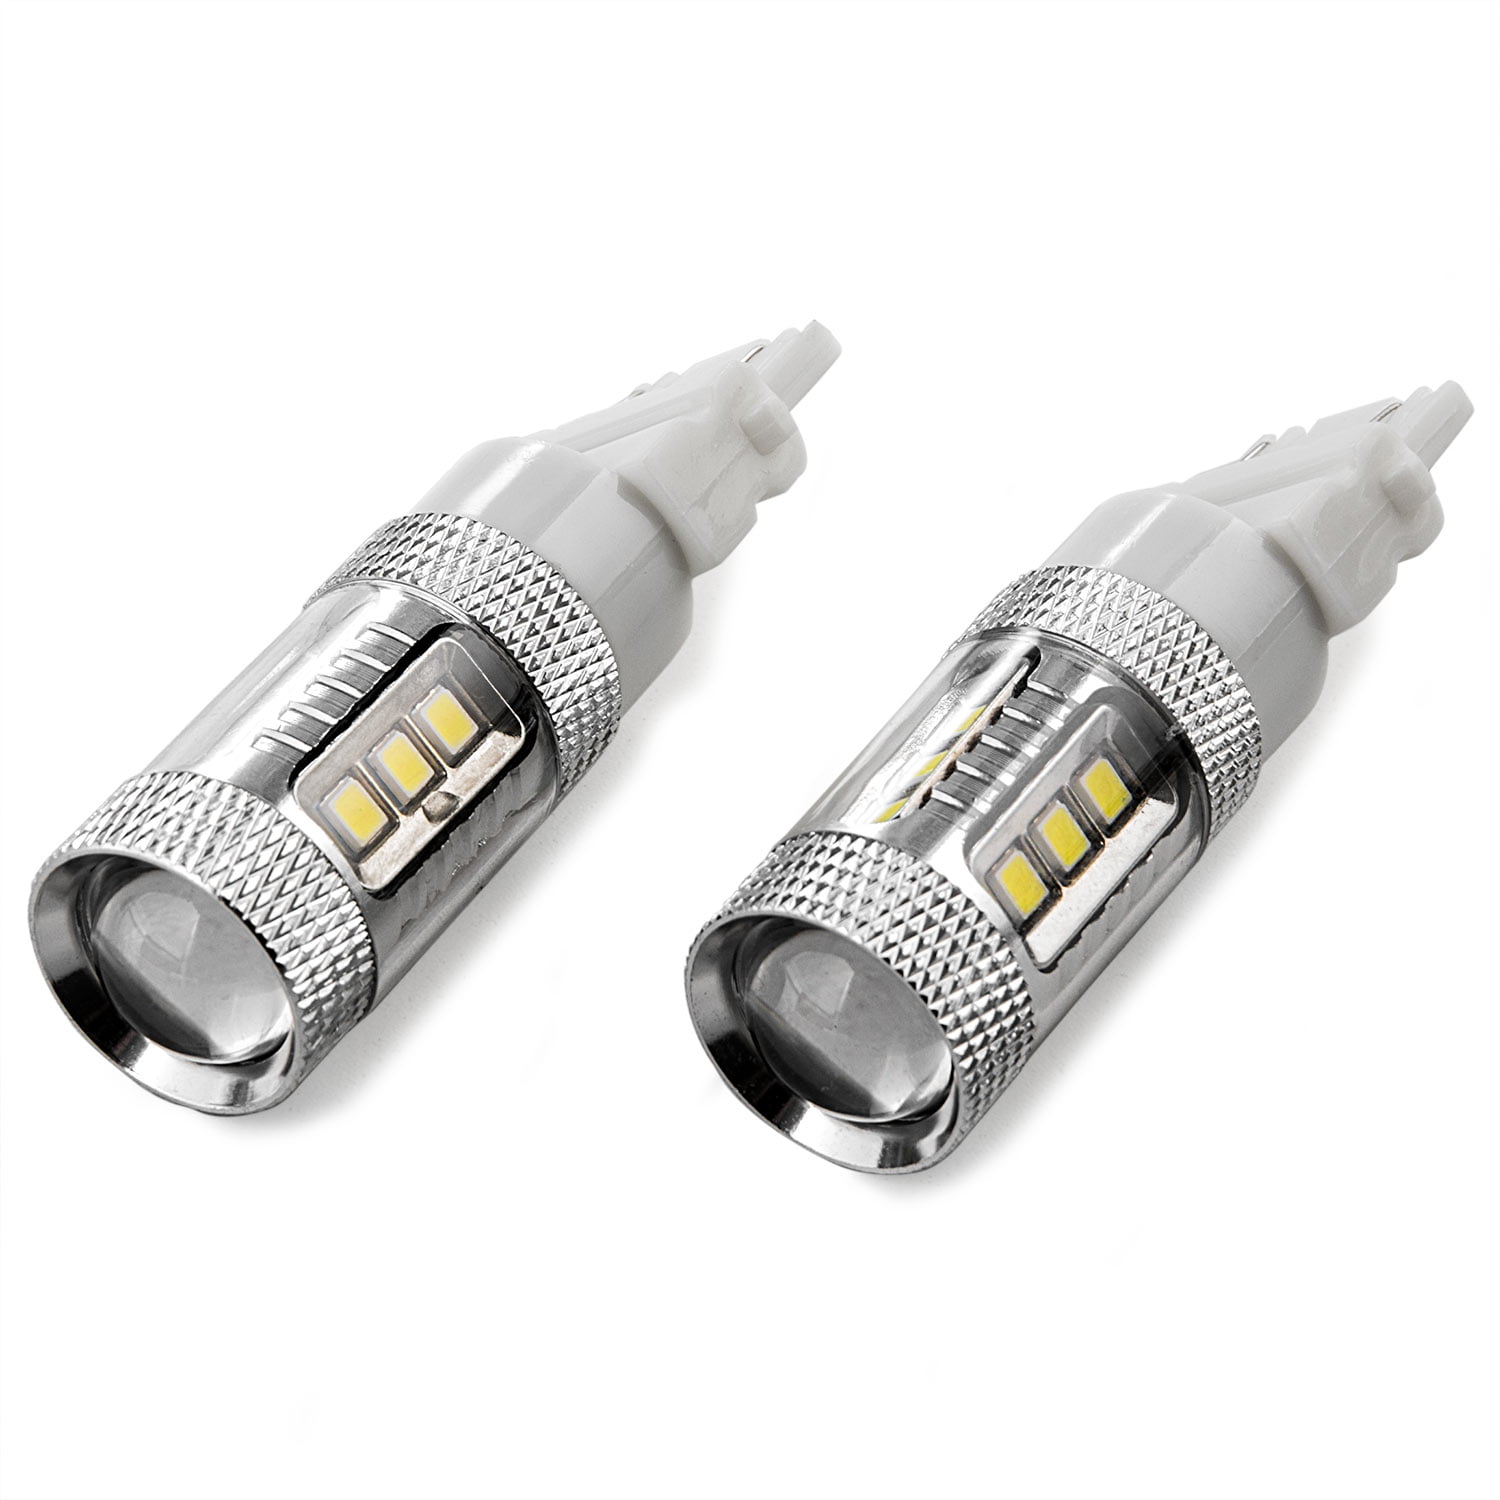 AUXLIGHT 3157 3156 3057 4157 3157K LED Bulbs Xenon White Ultra Bright 57-SMD LED Replacement for Back Up/Reverse Lights Pack of 2 Brake/Tail Lights Turn Signal/Parking or Running Lights 